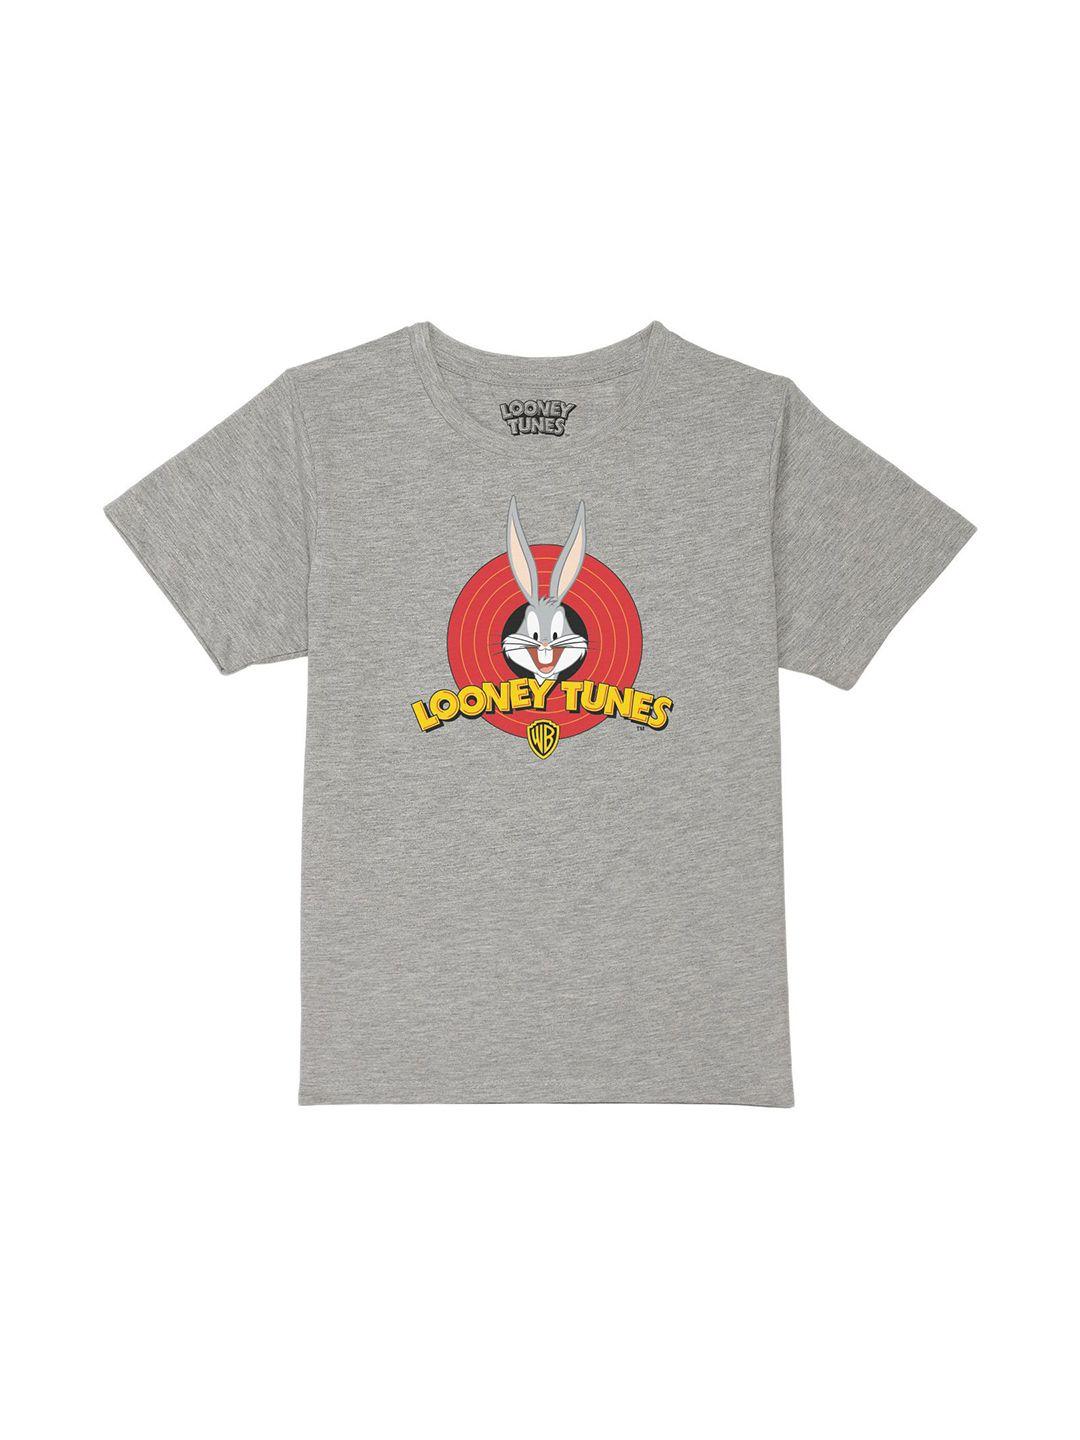 looney tunes by wear your mind boys grey printed pure cotton regular fit t-shirt